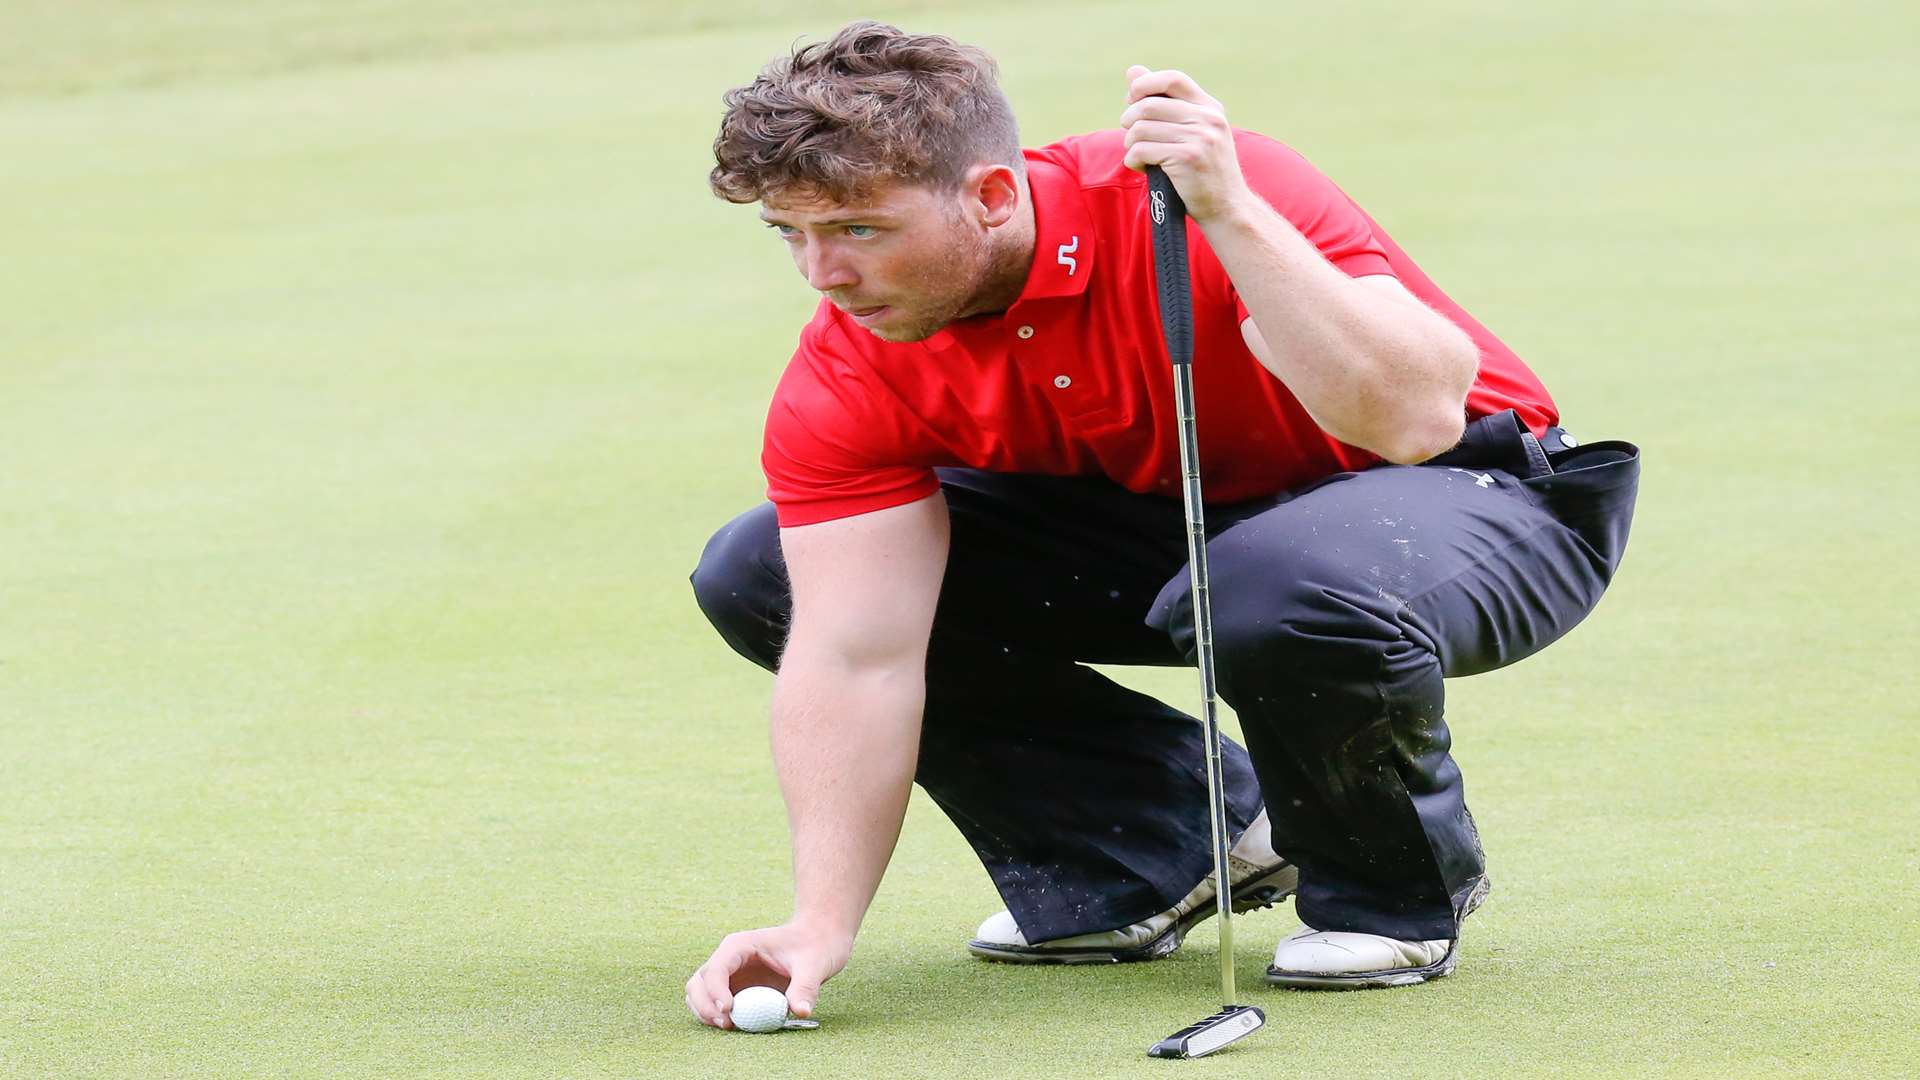 Ronan McGuirk from Princes on the second. Picture: Matthew Walker